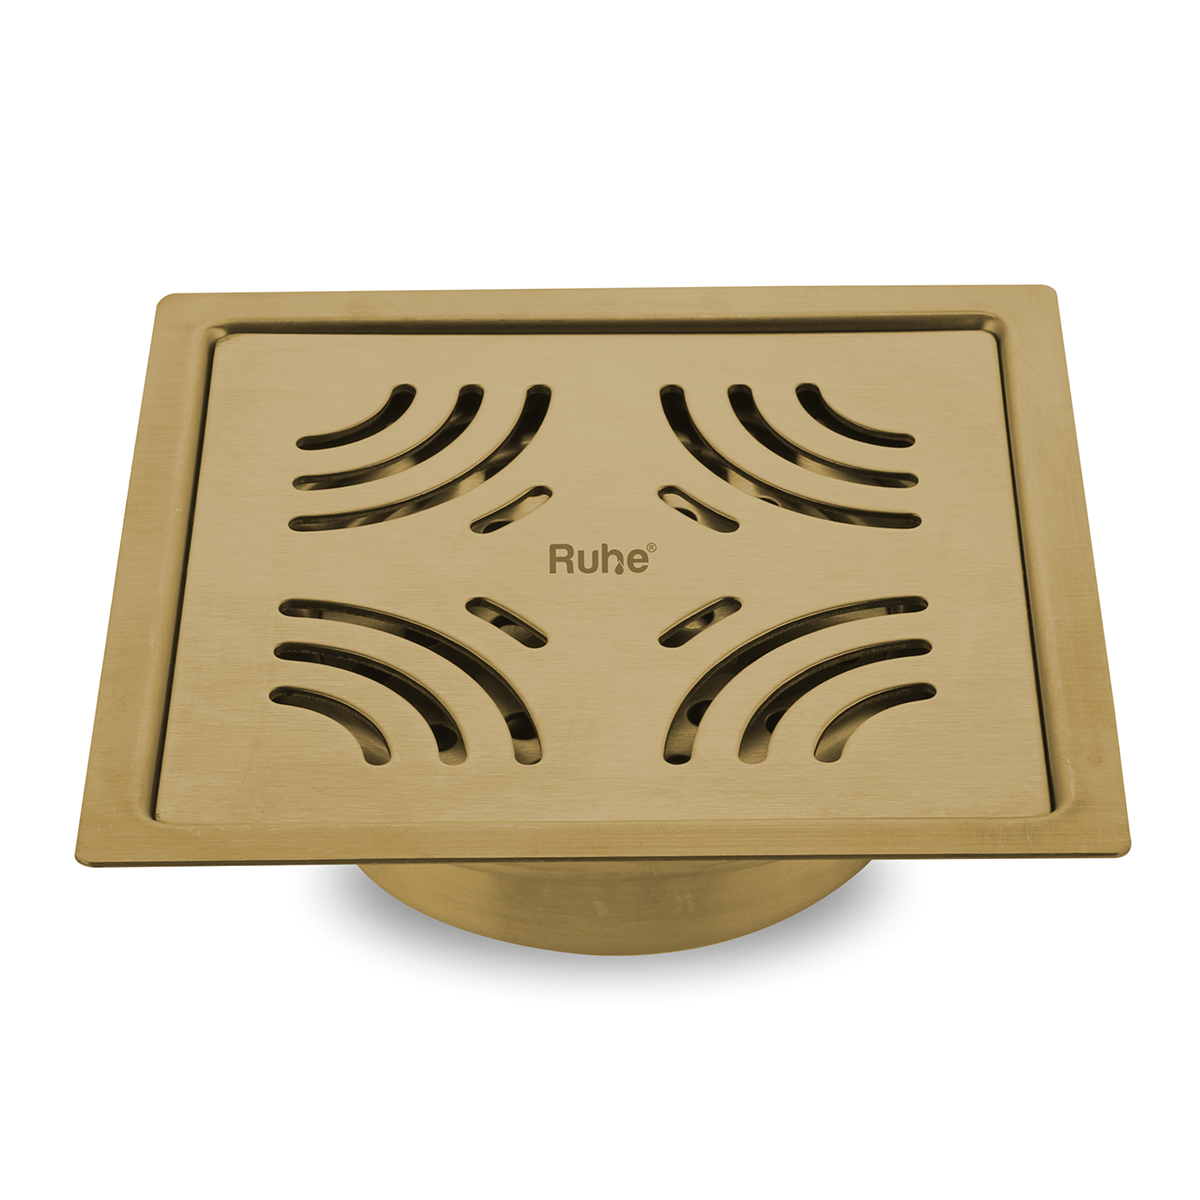 Emerald Square Flat Cut Floor Drain in Yellow Gold PVD Coating (6 x 6 Inches)